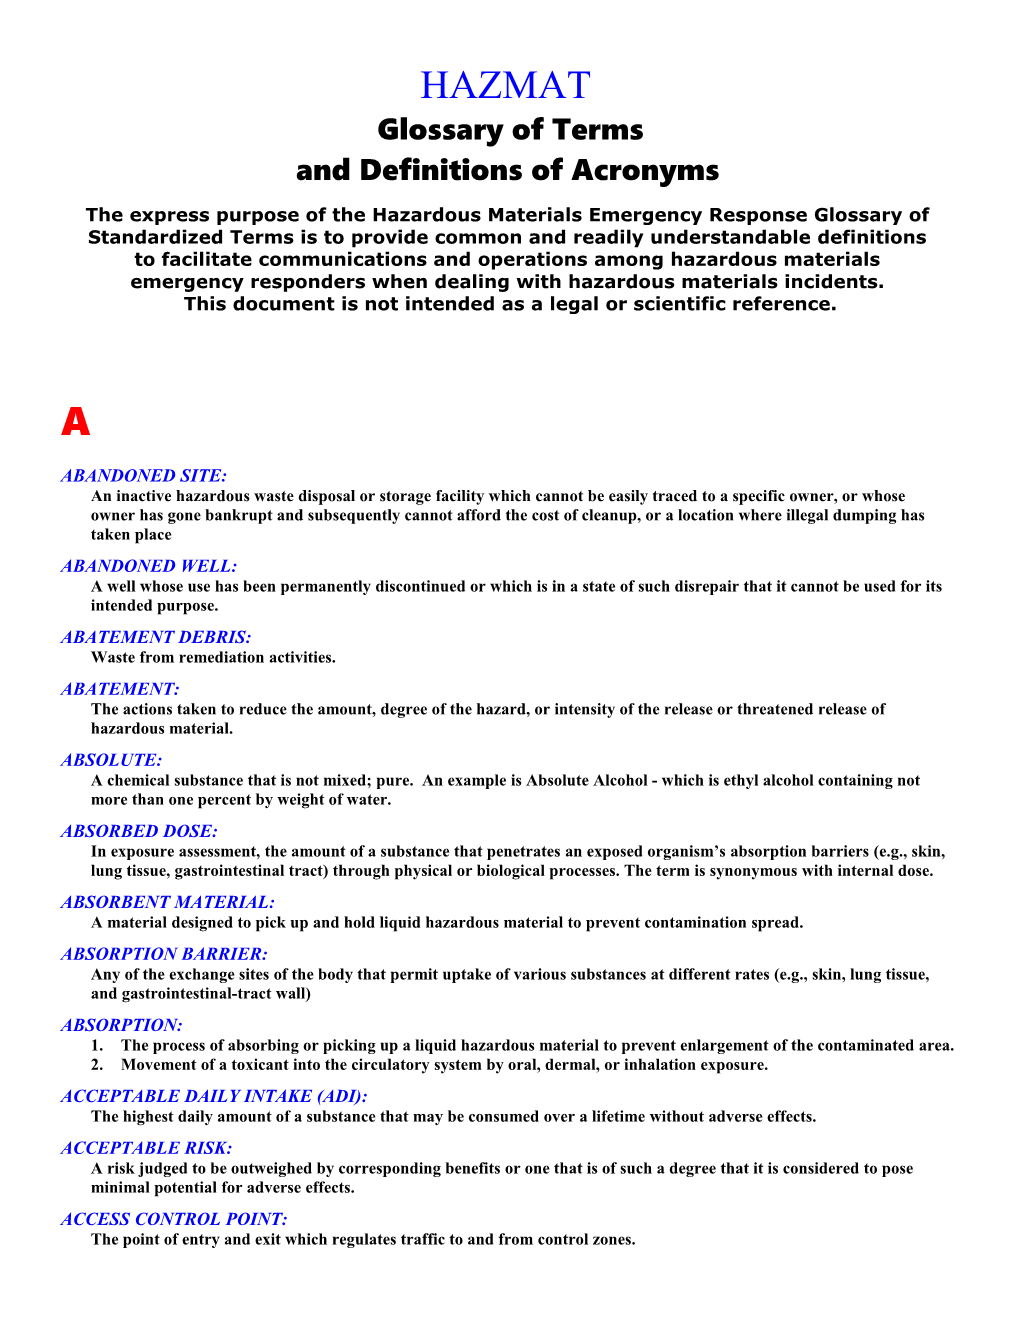 The Express Purpose of the Hazardous Materials Emergency Response Glossary Of